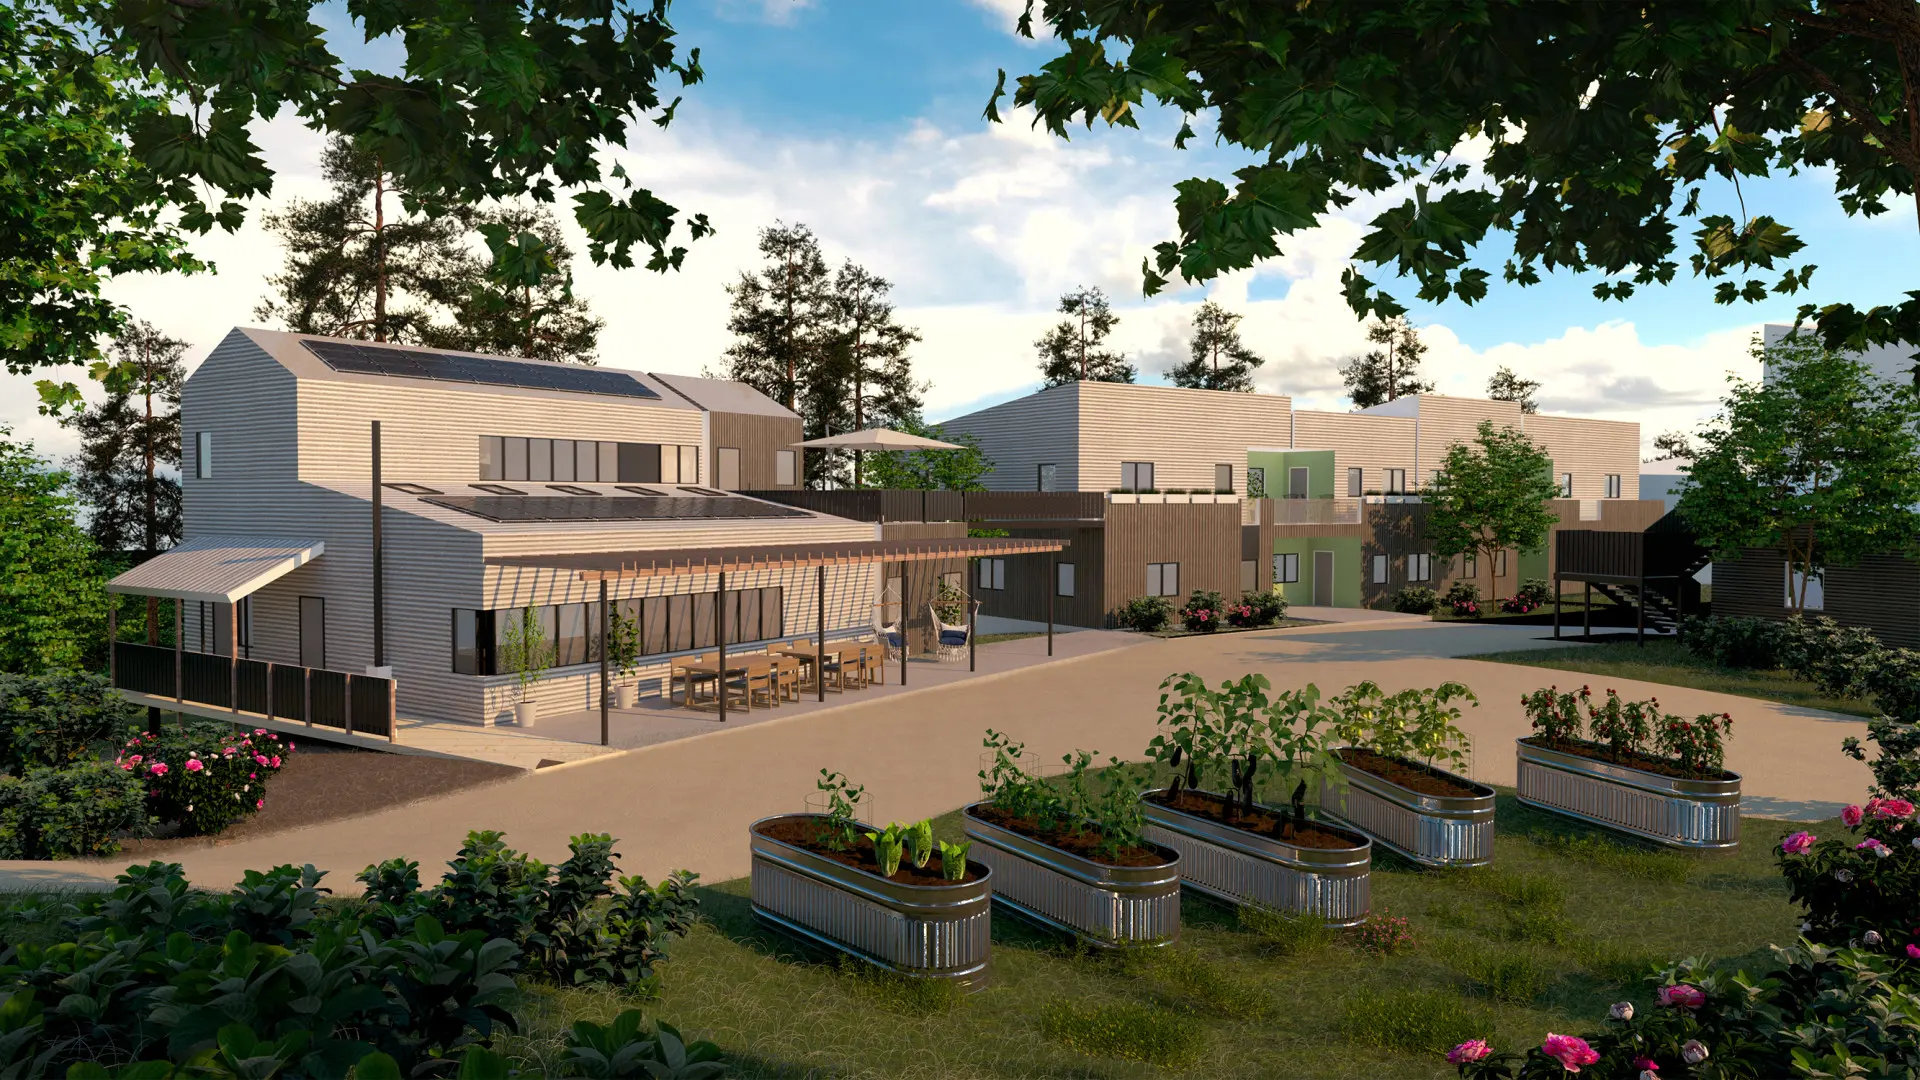  Atlantic Canada will soon have its first sustainable co-housing community